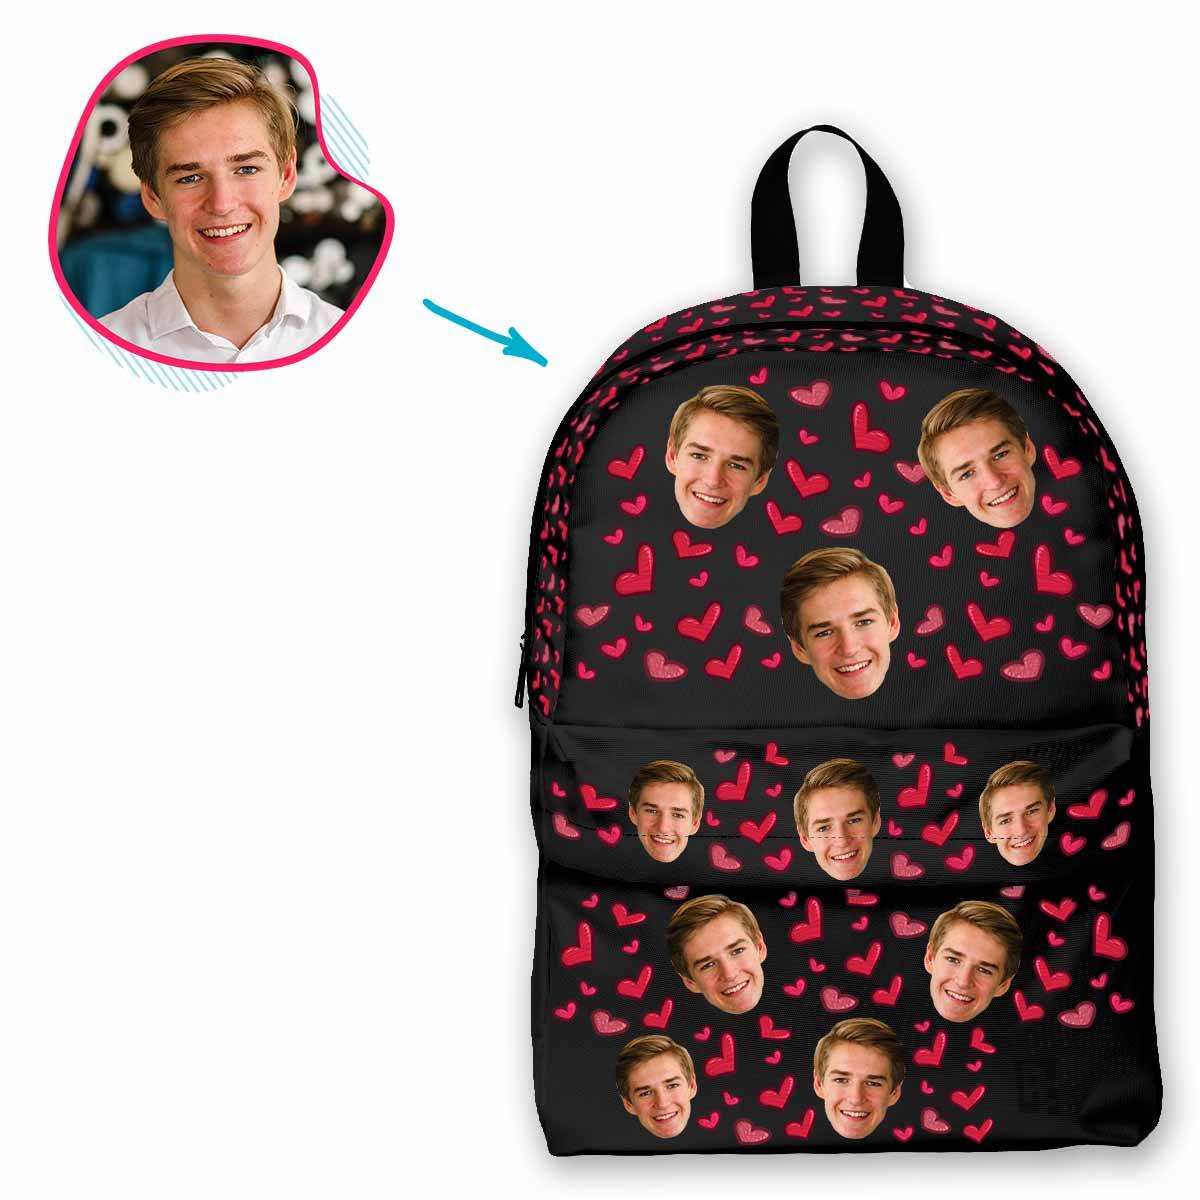 dark Heart classic backpack personalized with photo of face printed on it